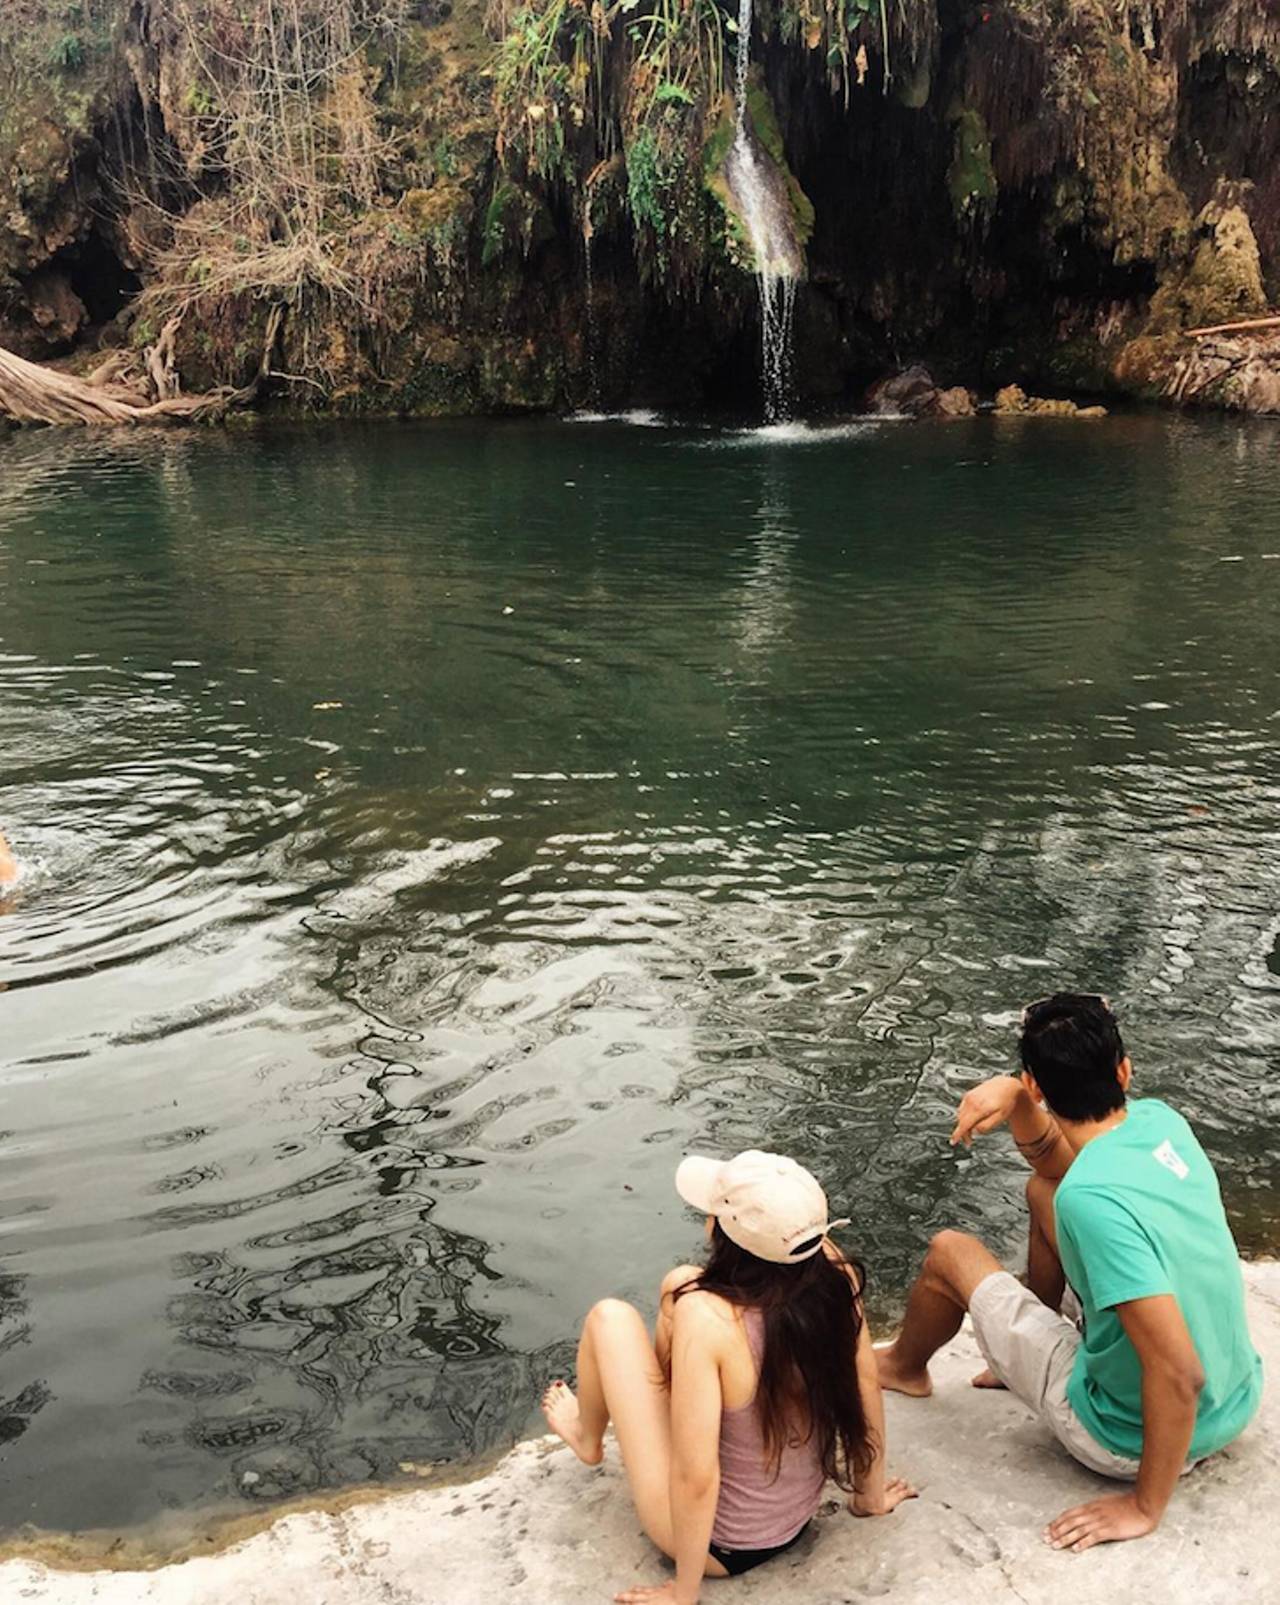 Karuse Springs in Cypress Creek   
404 Krause Spring Road, Spicewood, Texas 78669, (830) 693-4181, krausesprings.net
Situated on a bluff overlooking Cypress Creek, Krause Springs is possibly is the most beautiful swimming hole in the state. 
Photo via Instagram (ayeitsbryyy)